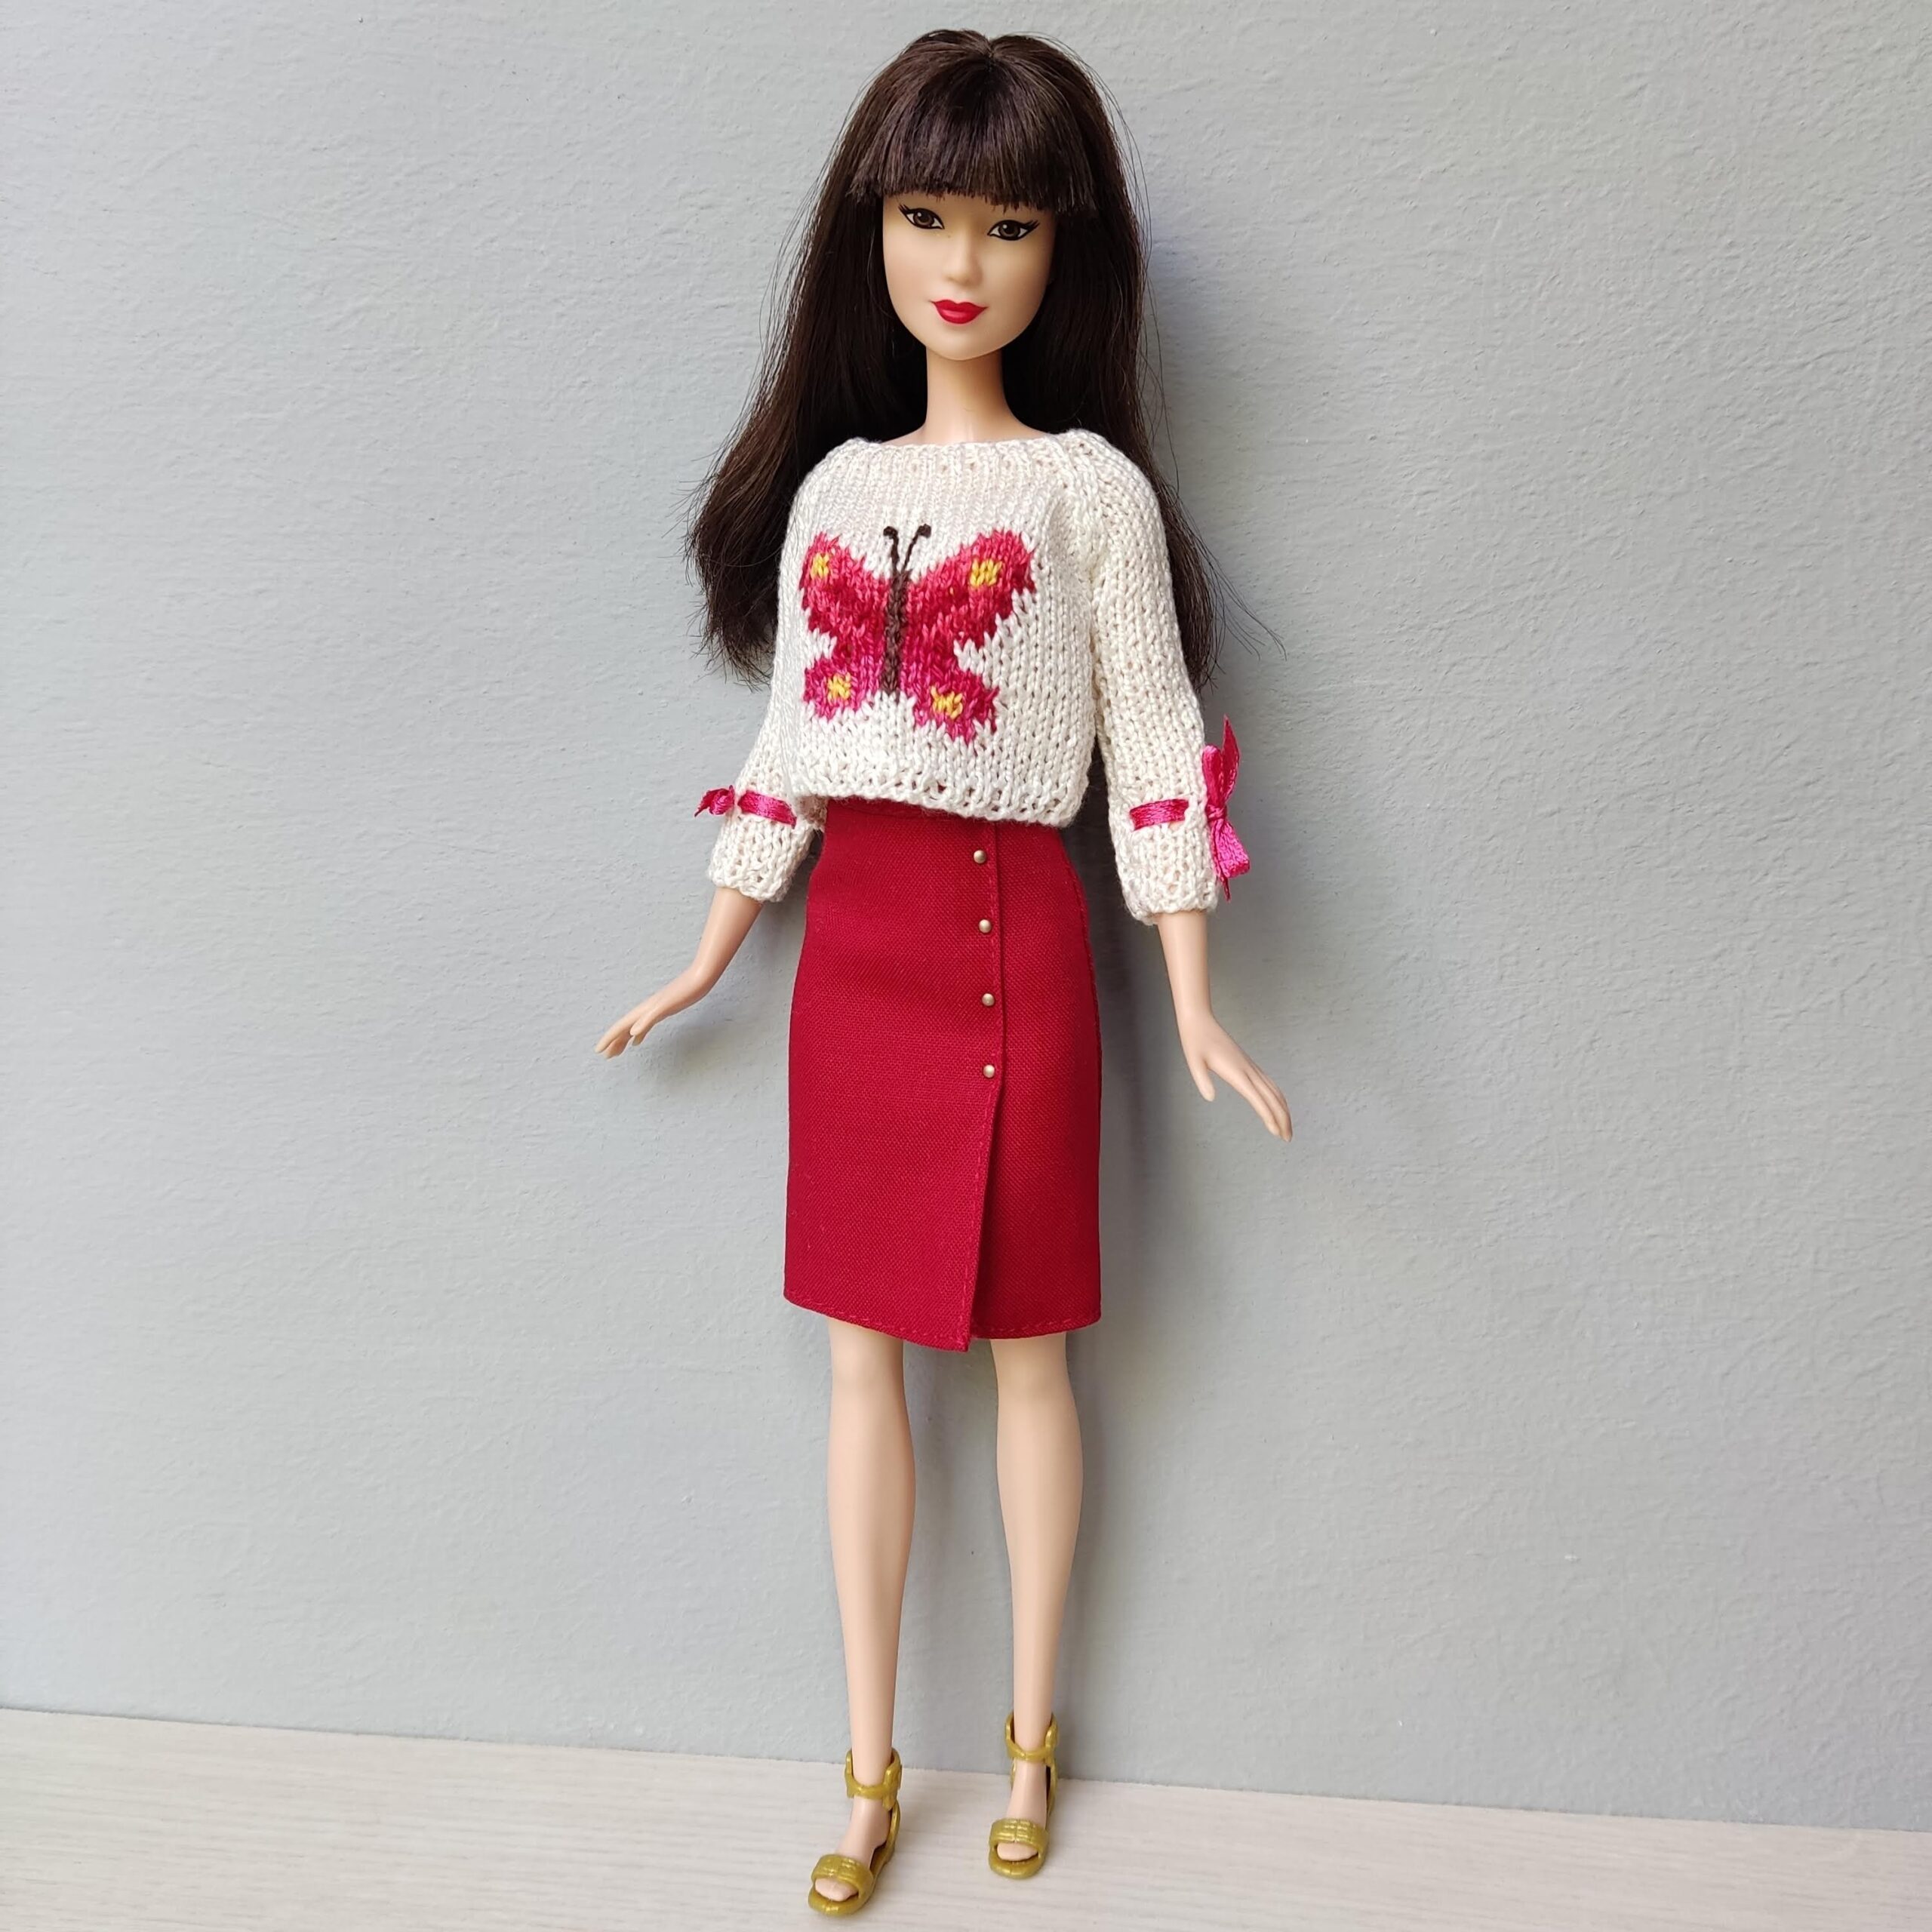 Barbie Doll Clothes Red Butterfly Sweater For Barbie Doll